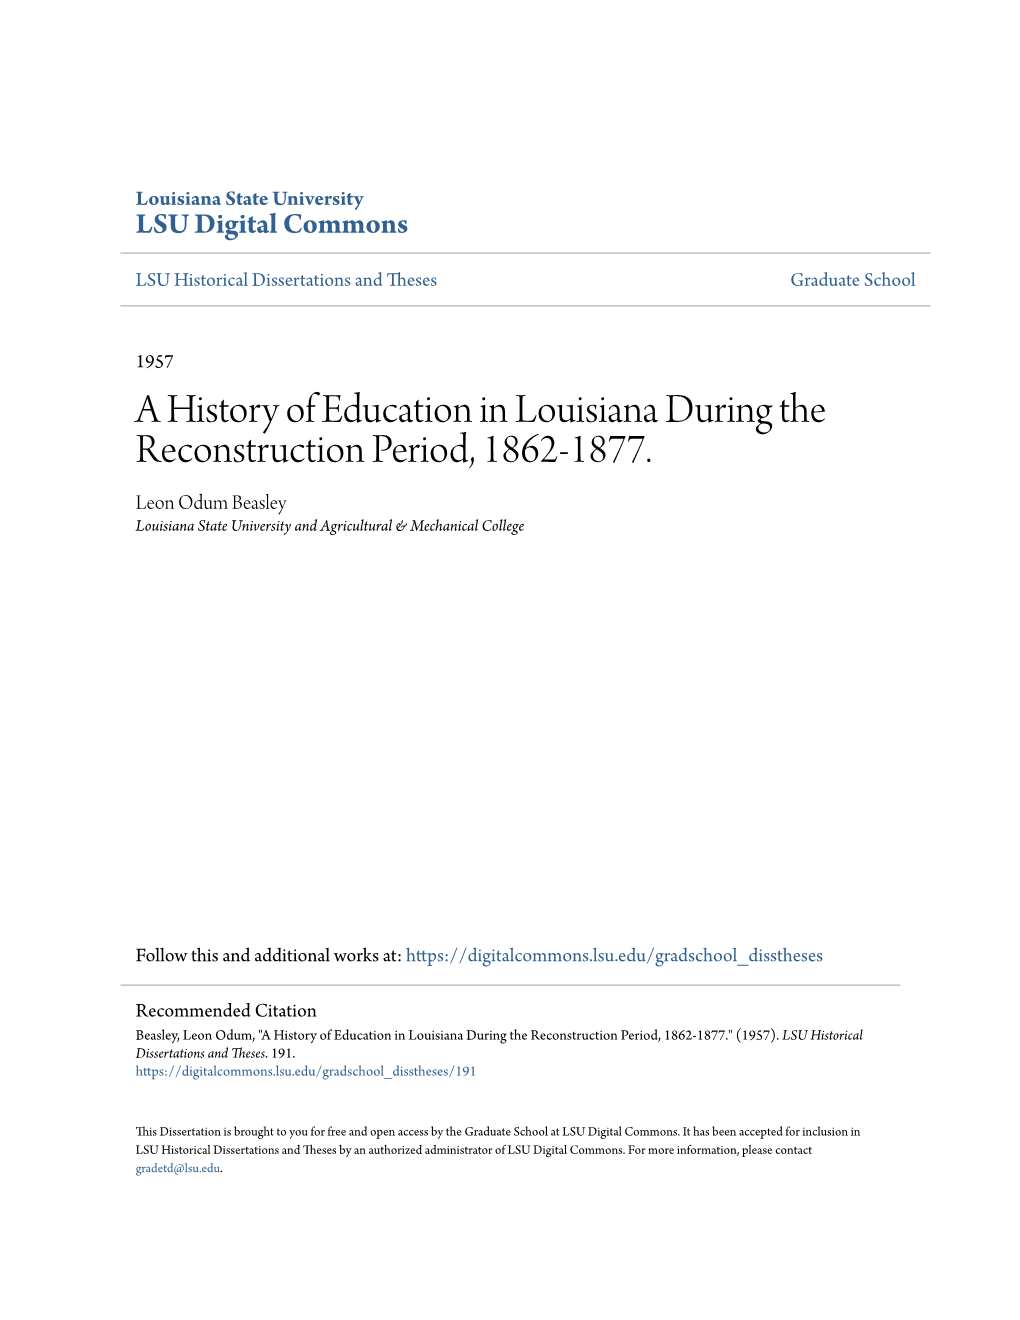 A History of Education in Louisiana During the Reconstruction Period, 1862-1877